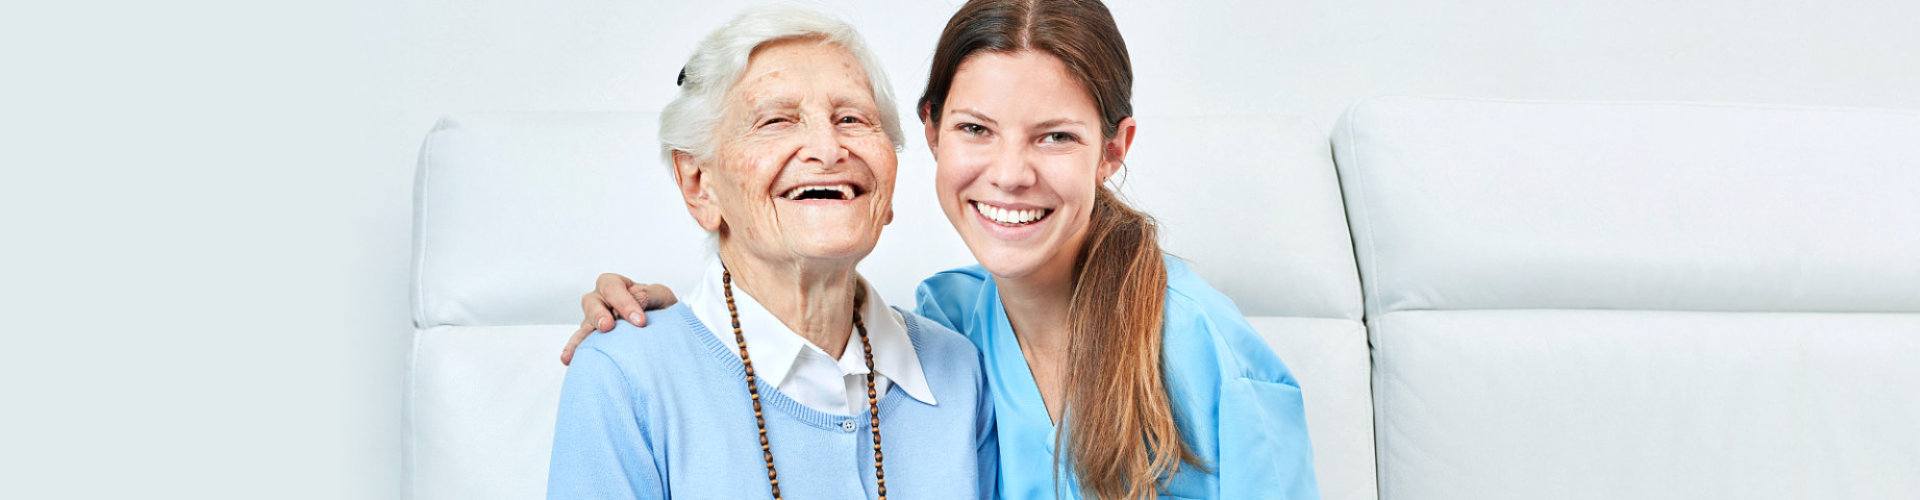 young caregiver and old woman smiling